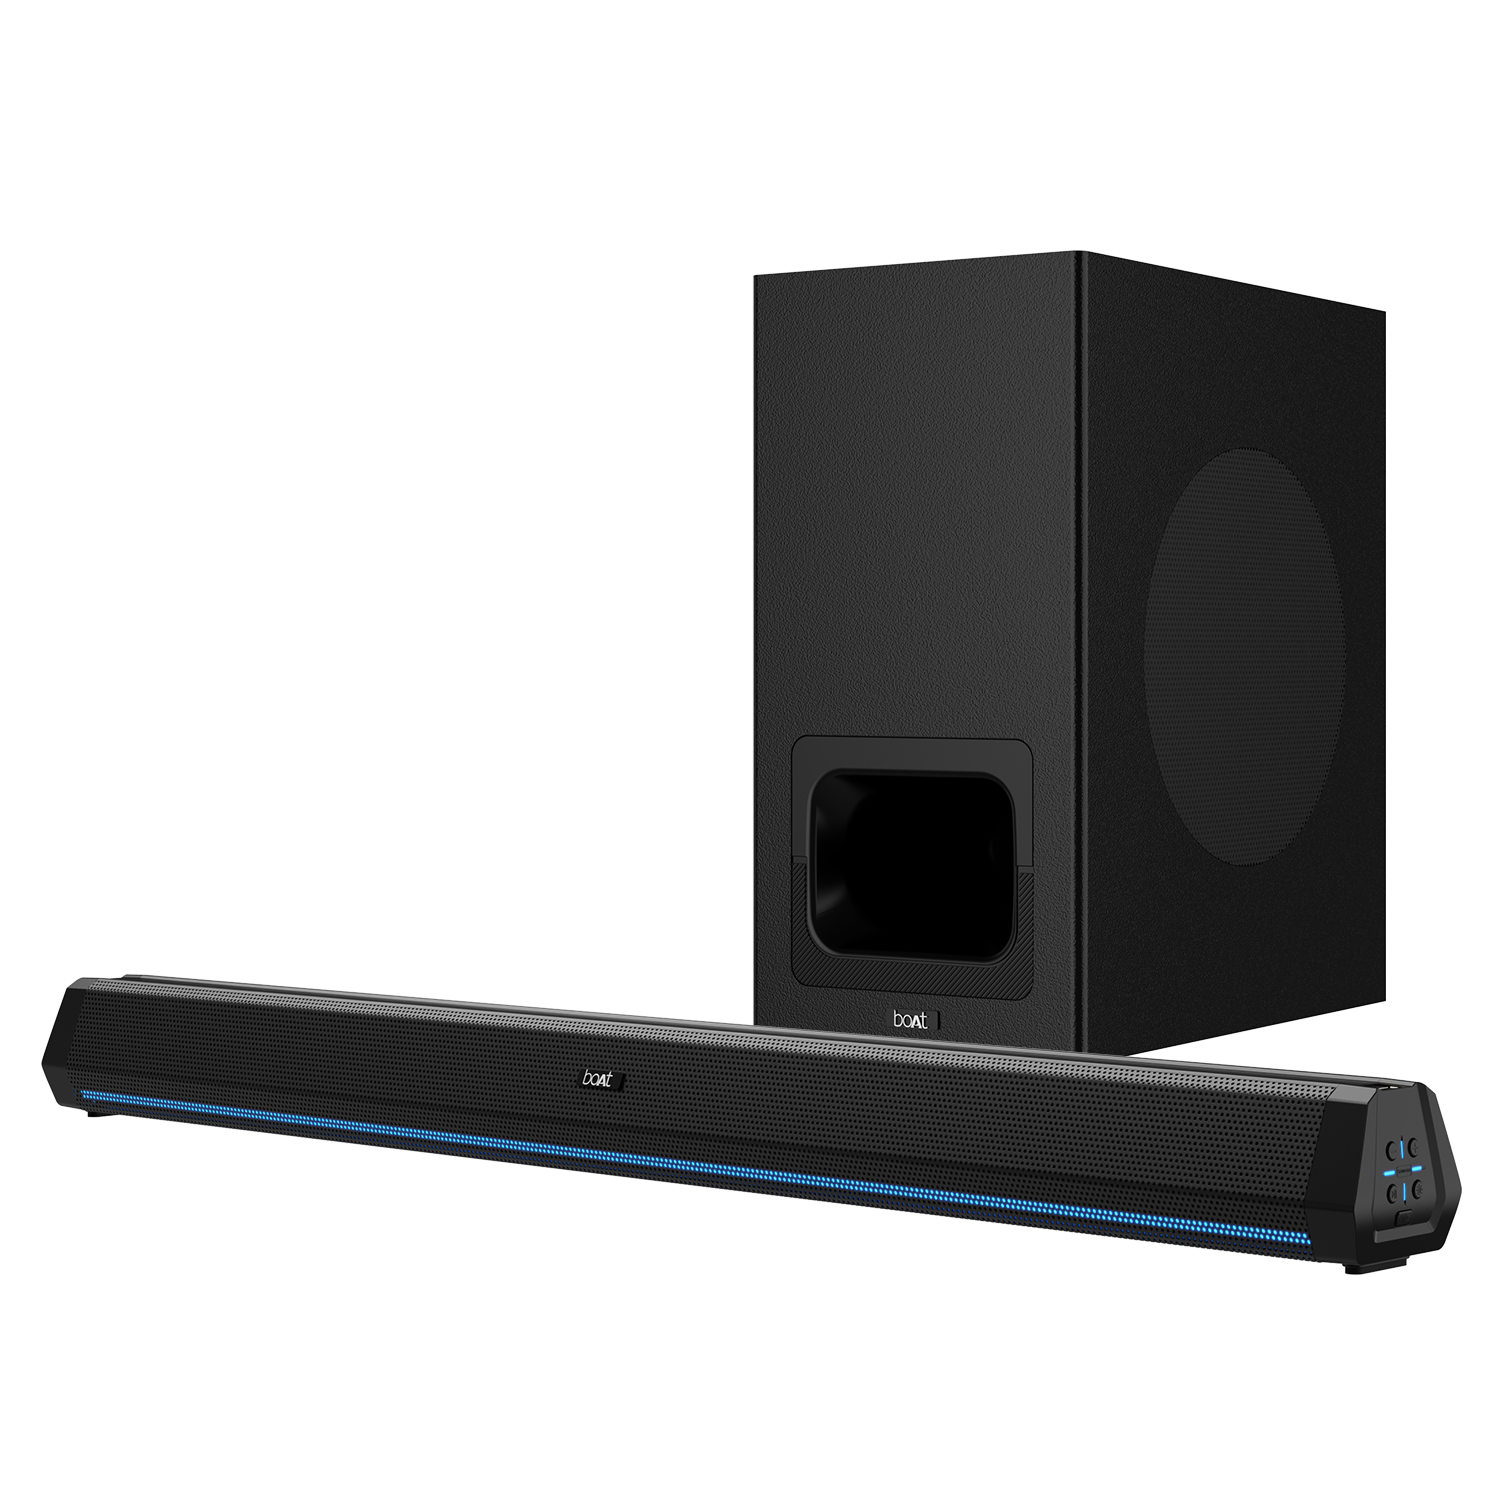 boAt Aavante Bar 2600 | 2.1 Channel 300W RMS Bluetooth Soundbar, Wired Subwoofer, Multi-connectivity